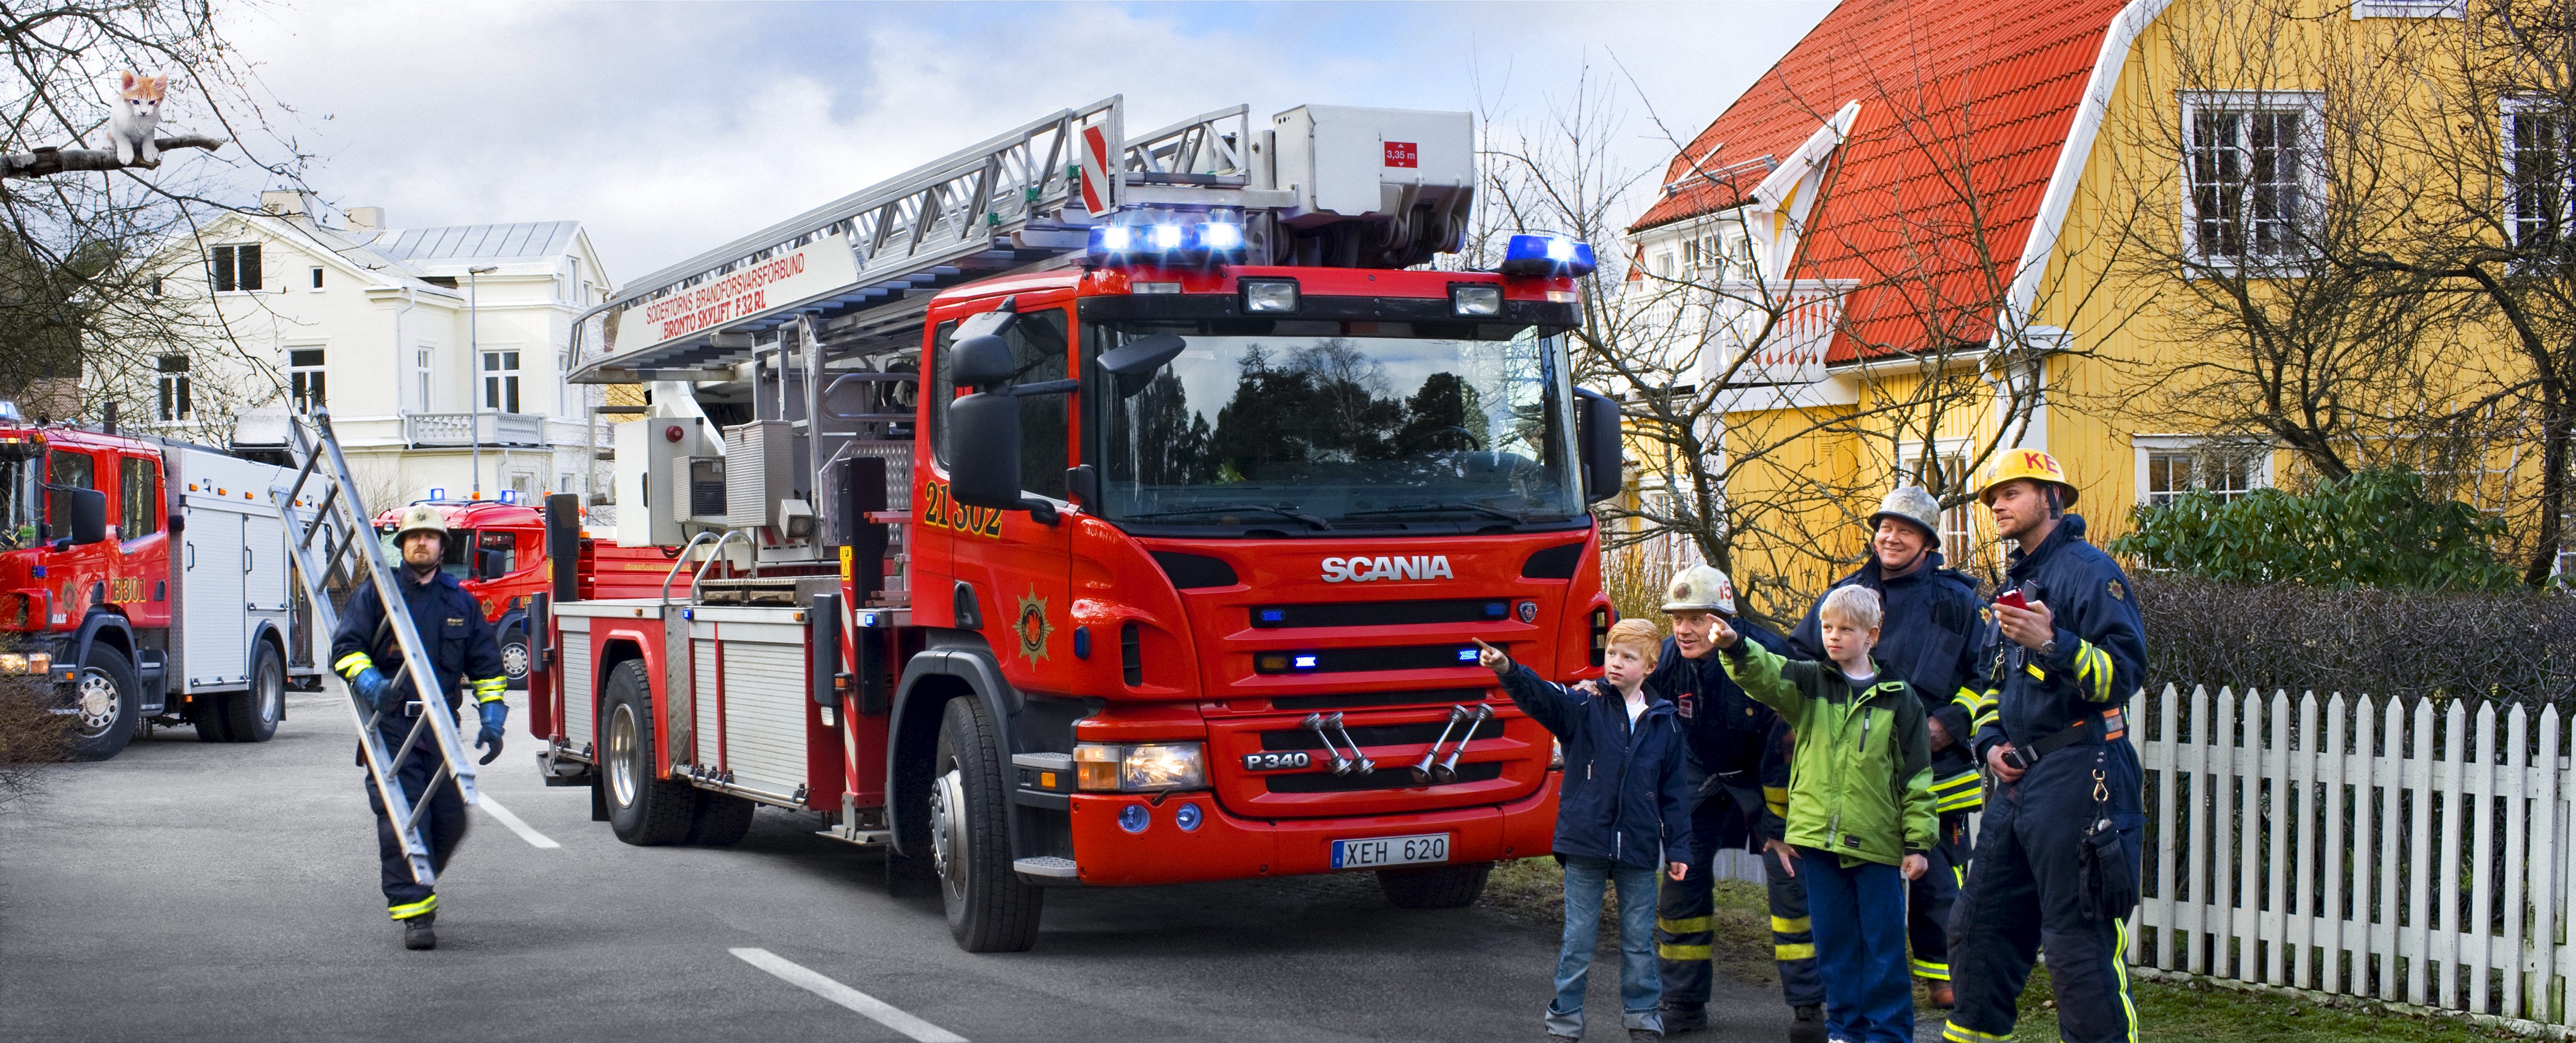 Free Download Scania Vehicle Truck Fire Truck Fire Engine